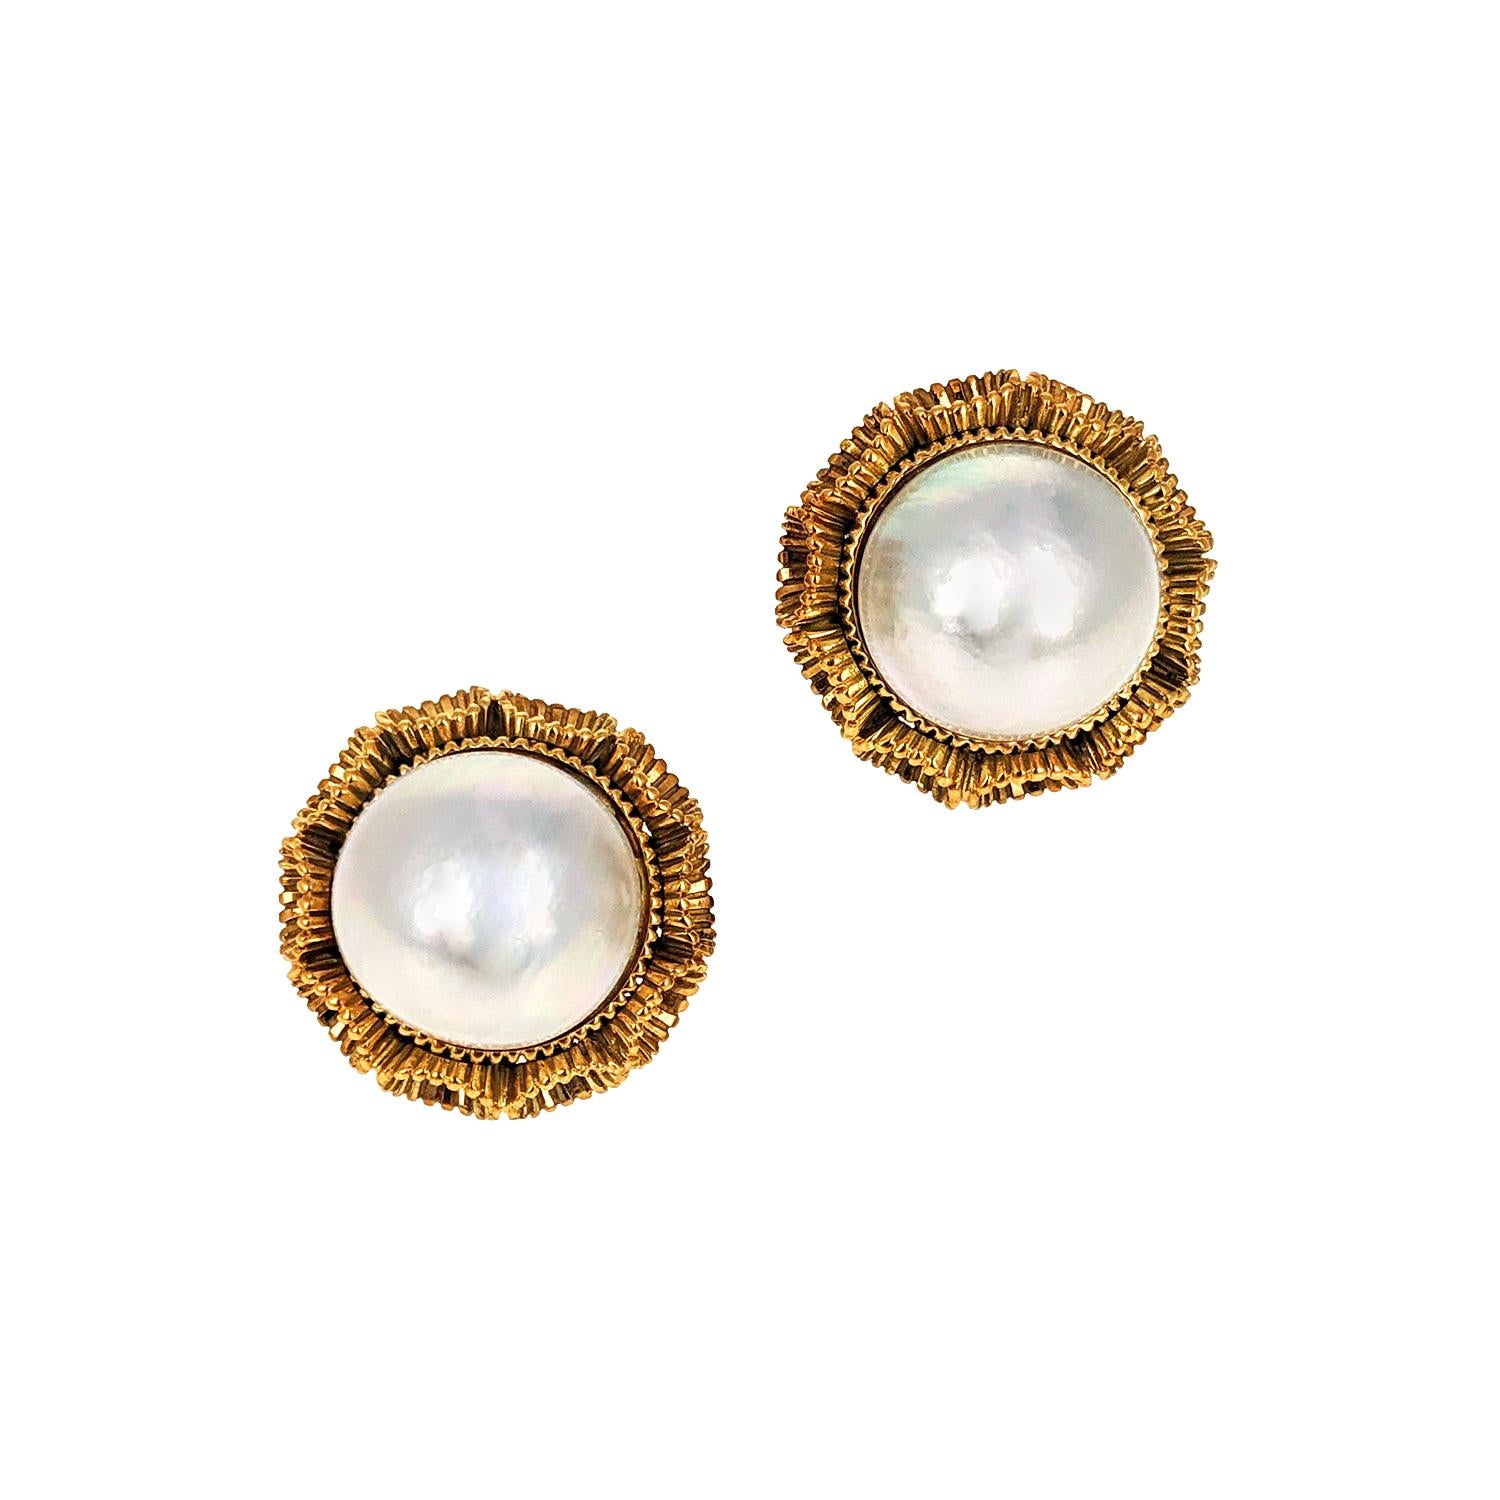 These clip earrings are set with two large white mabe pearls in textured fluted 18 karat yellow gold mountings. The pearls have very good luster and great surface quality. Each is in wonderful condition and very chic. They were made circa 1980.